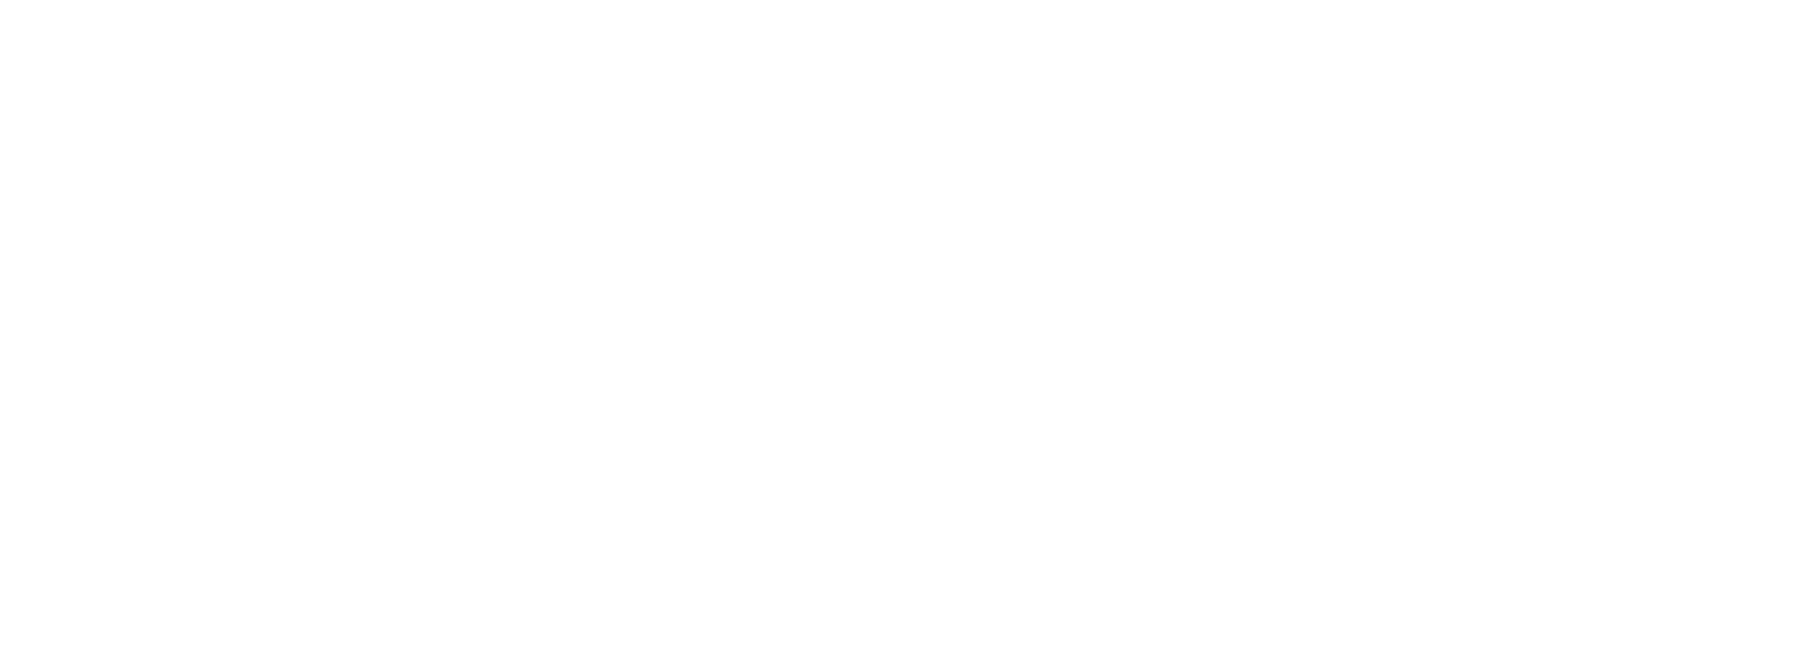 White Ibm Monochrome Rectangle Styling PNG